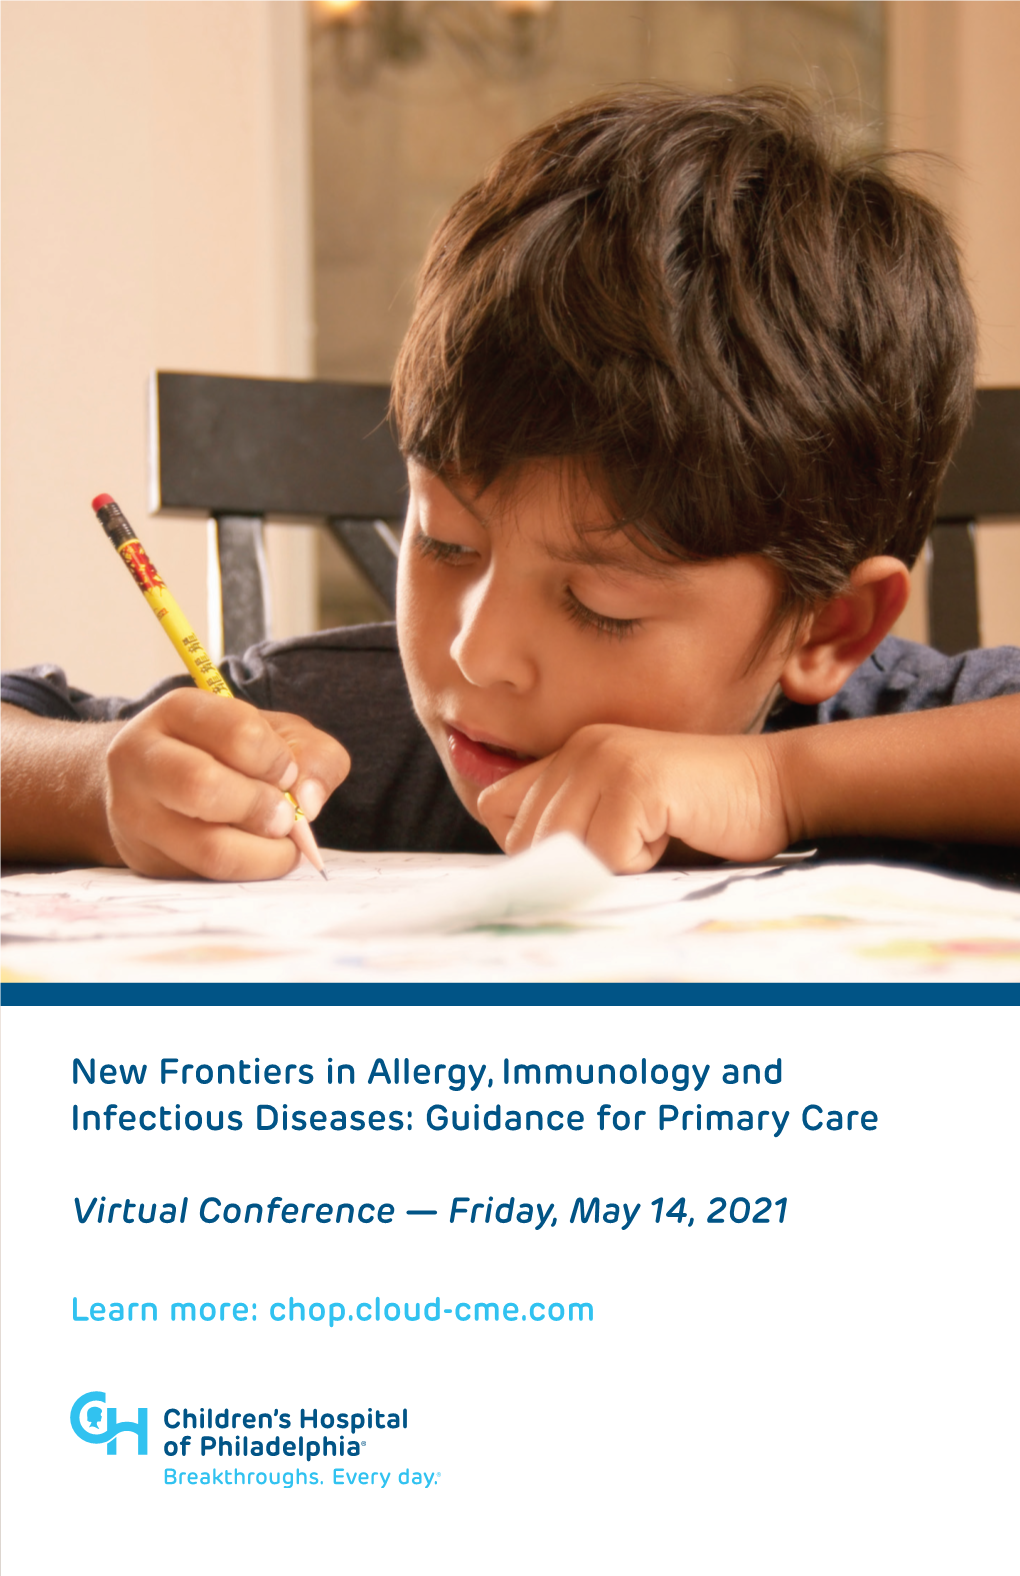 New Frontiers in Allergy, Immunology and Infectious Diseases: Guidance for Primary Care